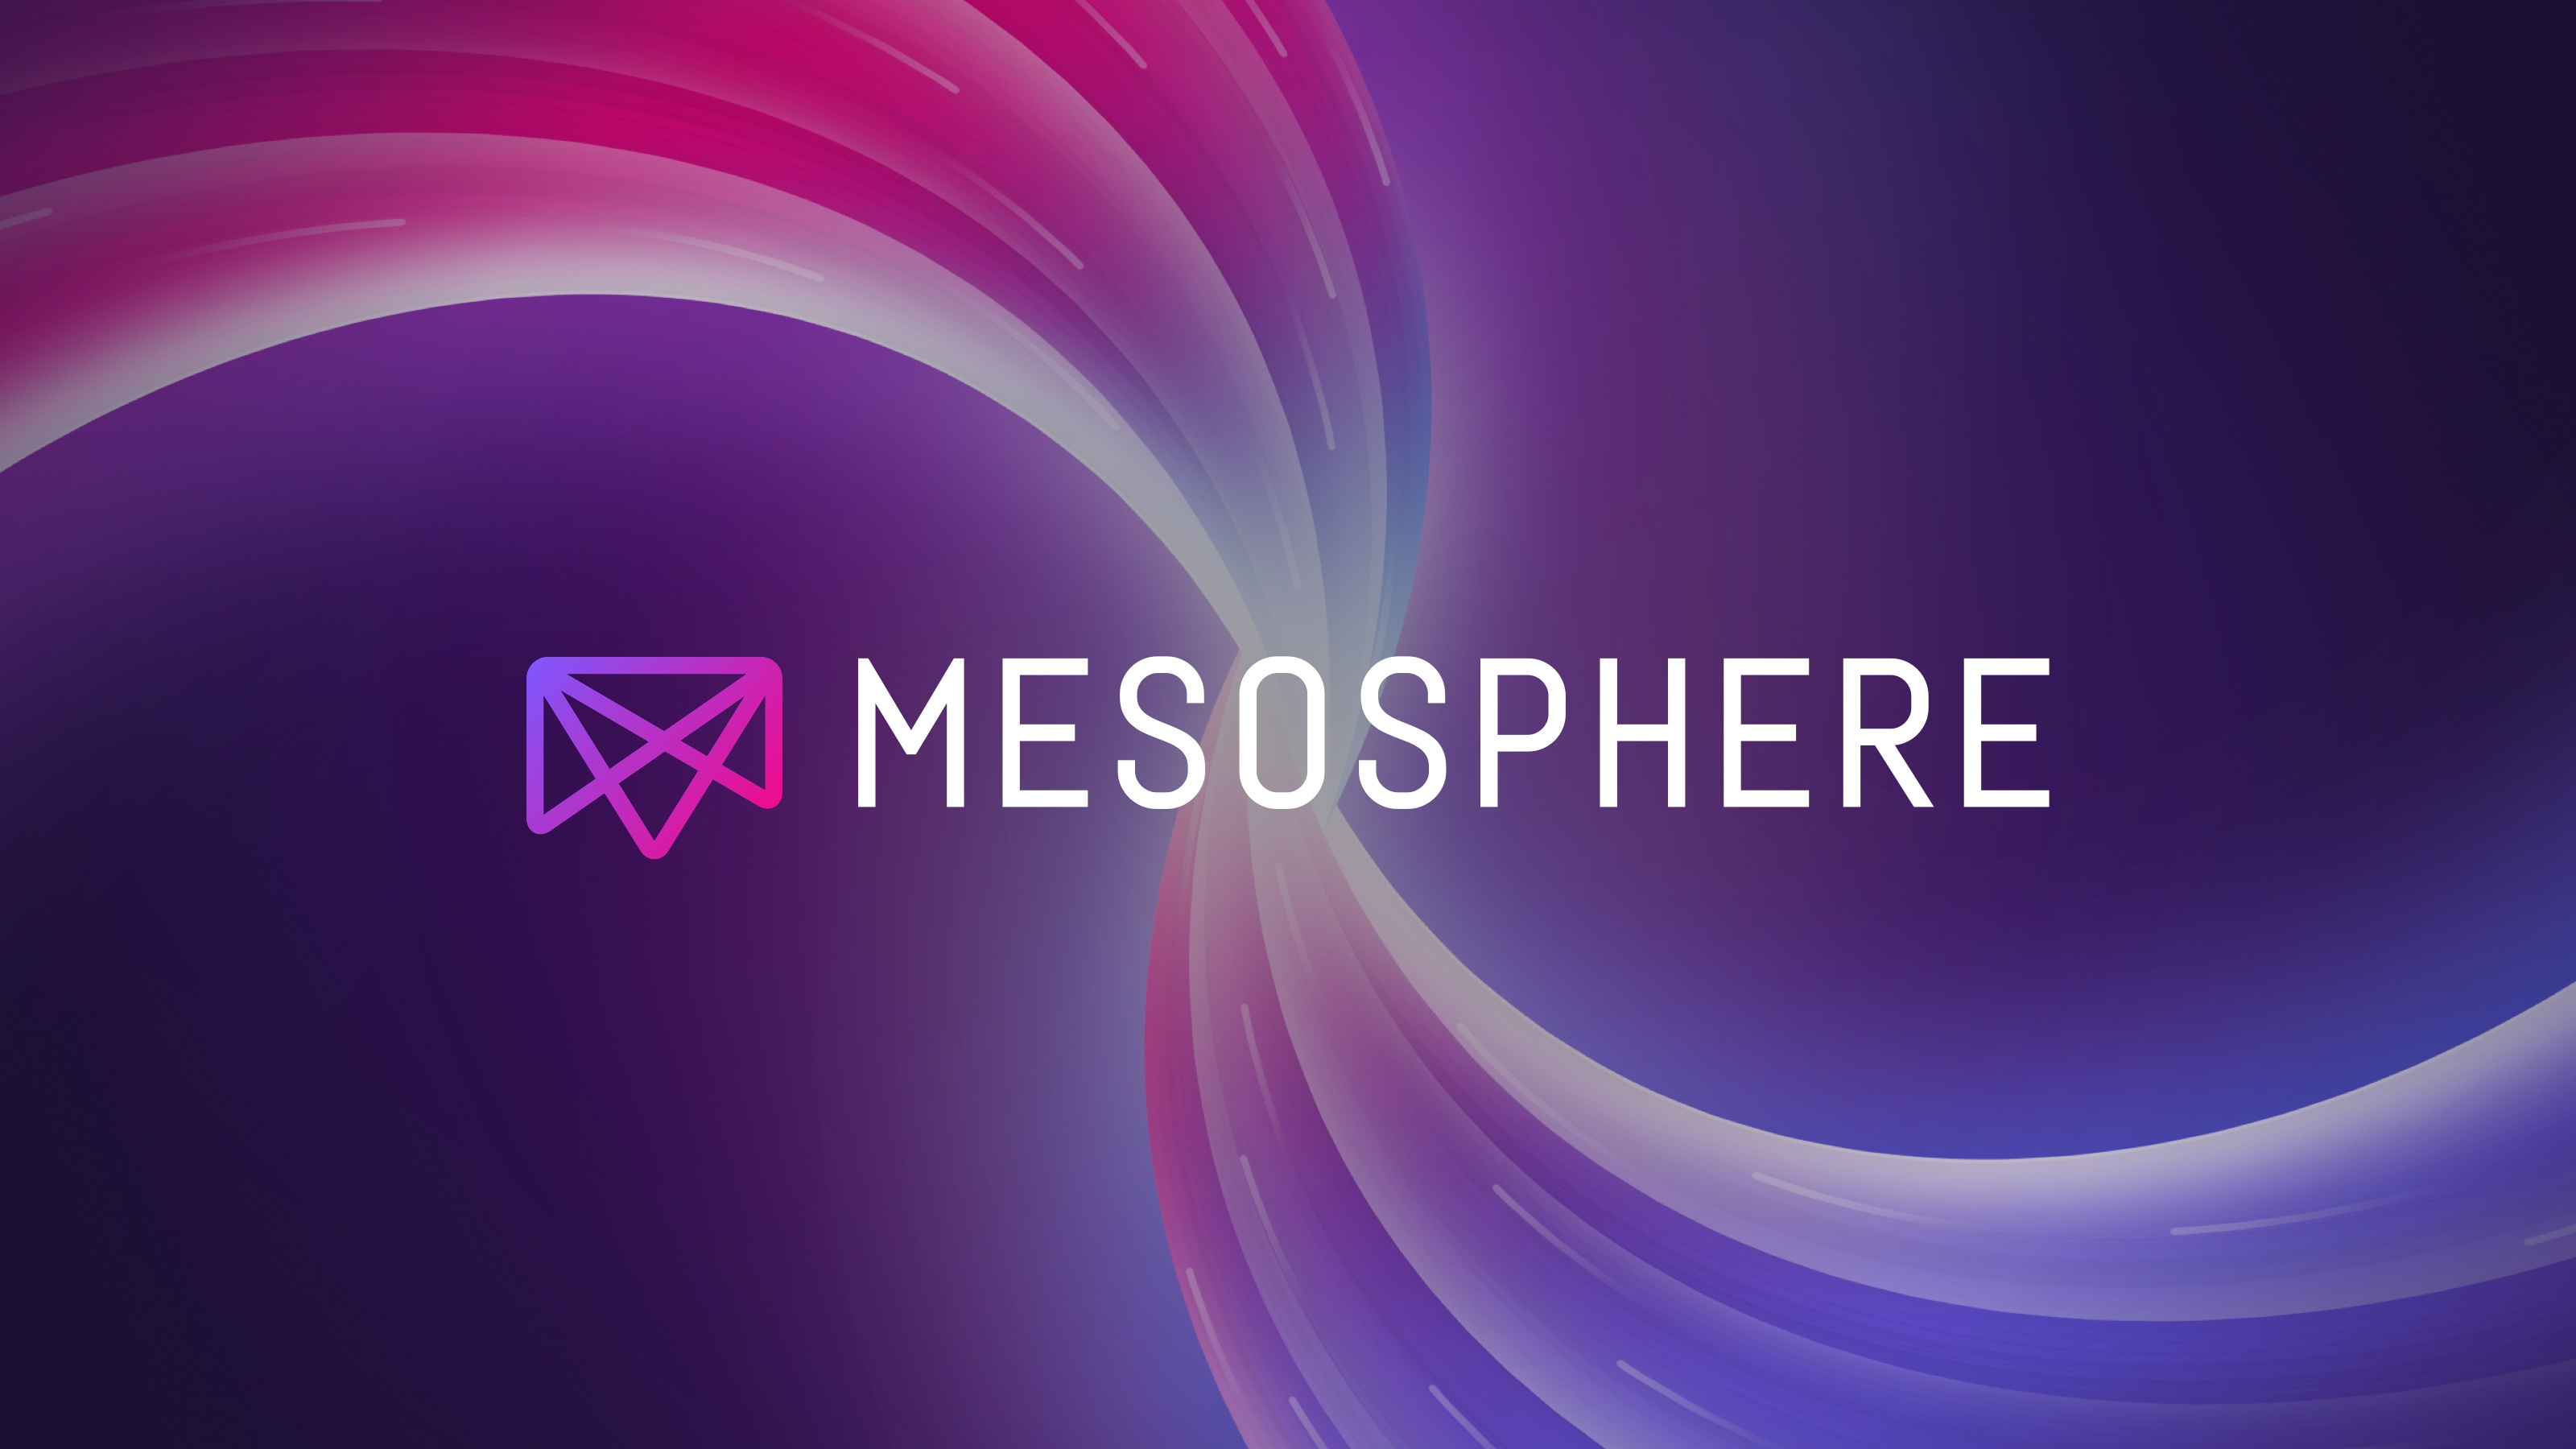 A New Chapter For Mesosphere